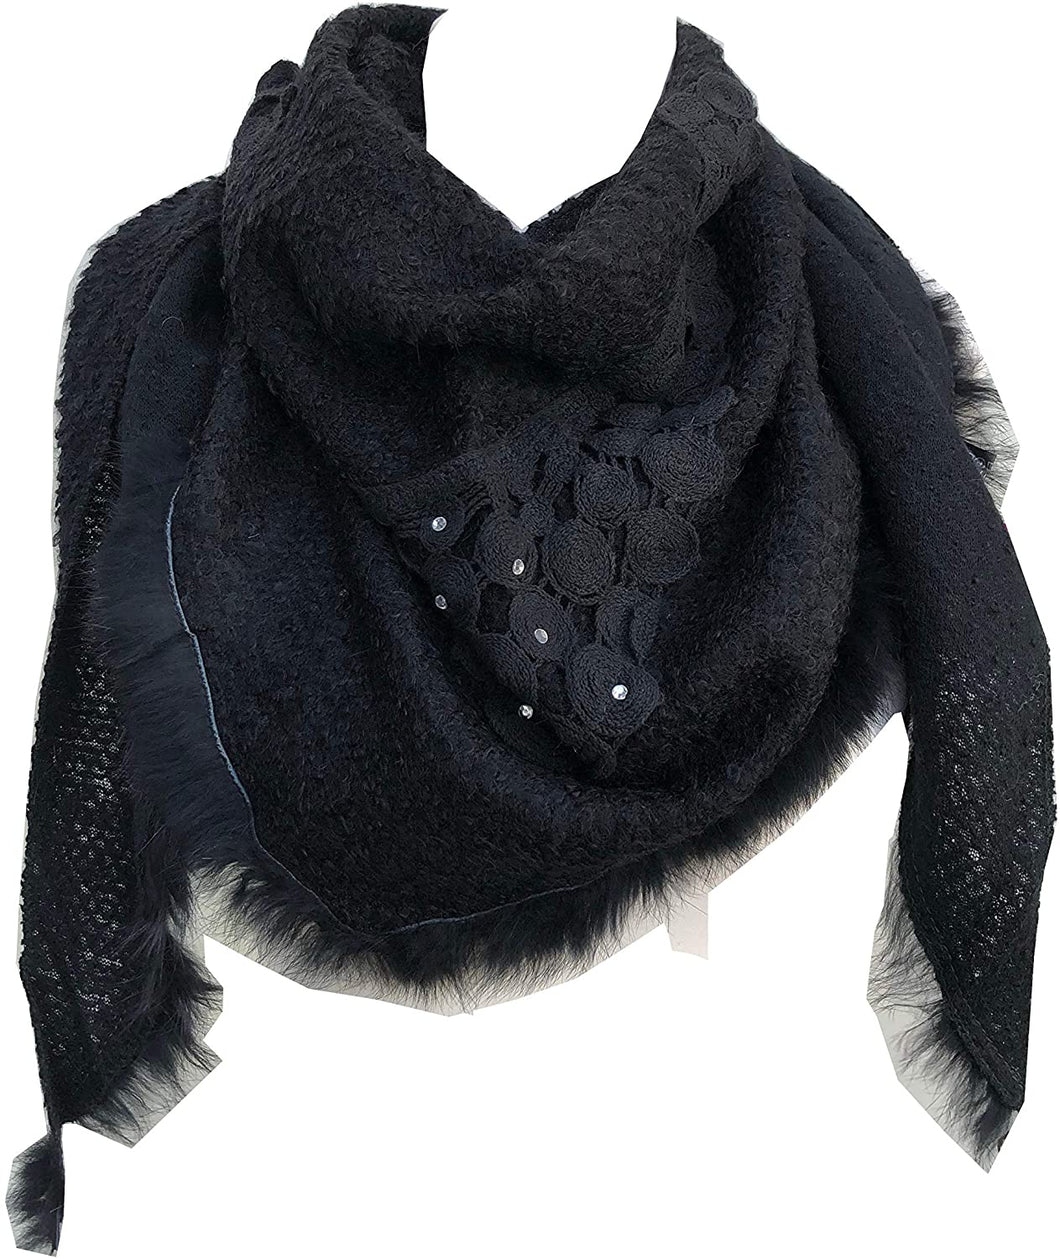 Pamper Yourself Now Black Triangle Scarf with Fur Trim and Sequin.